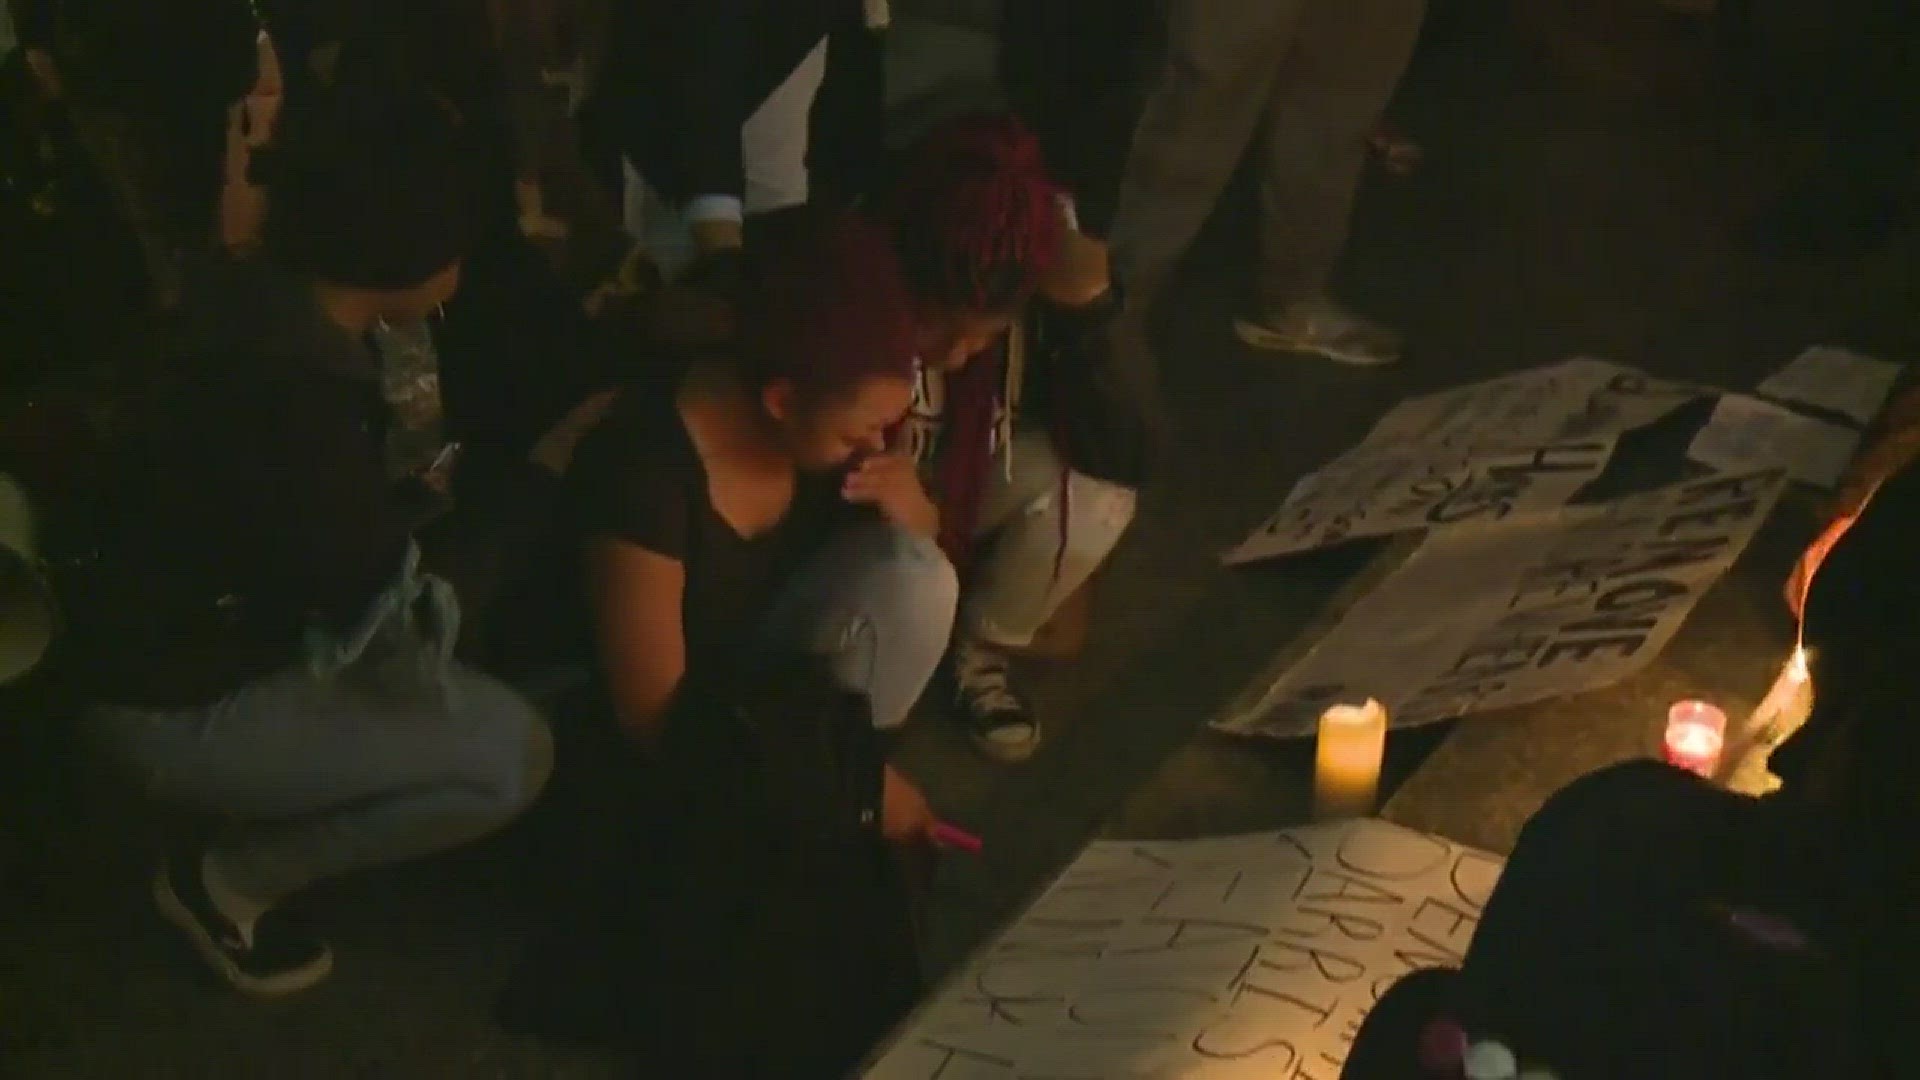 Candlelight vigil to honor Quanice Hayes